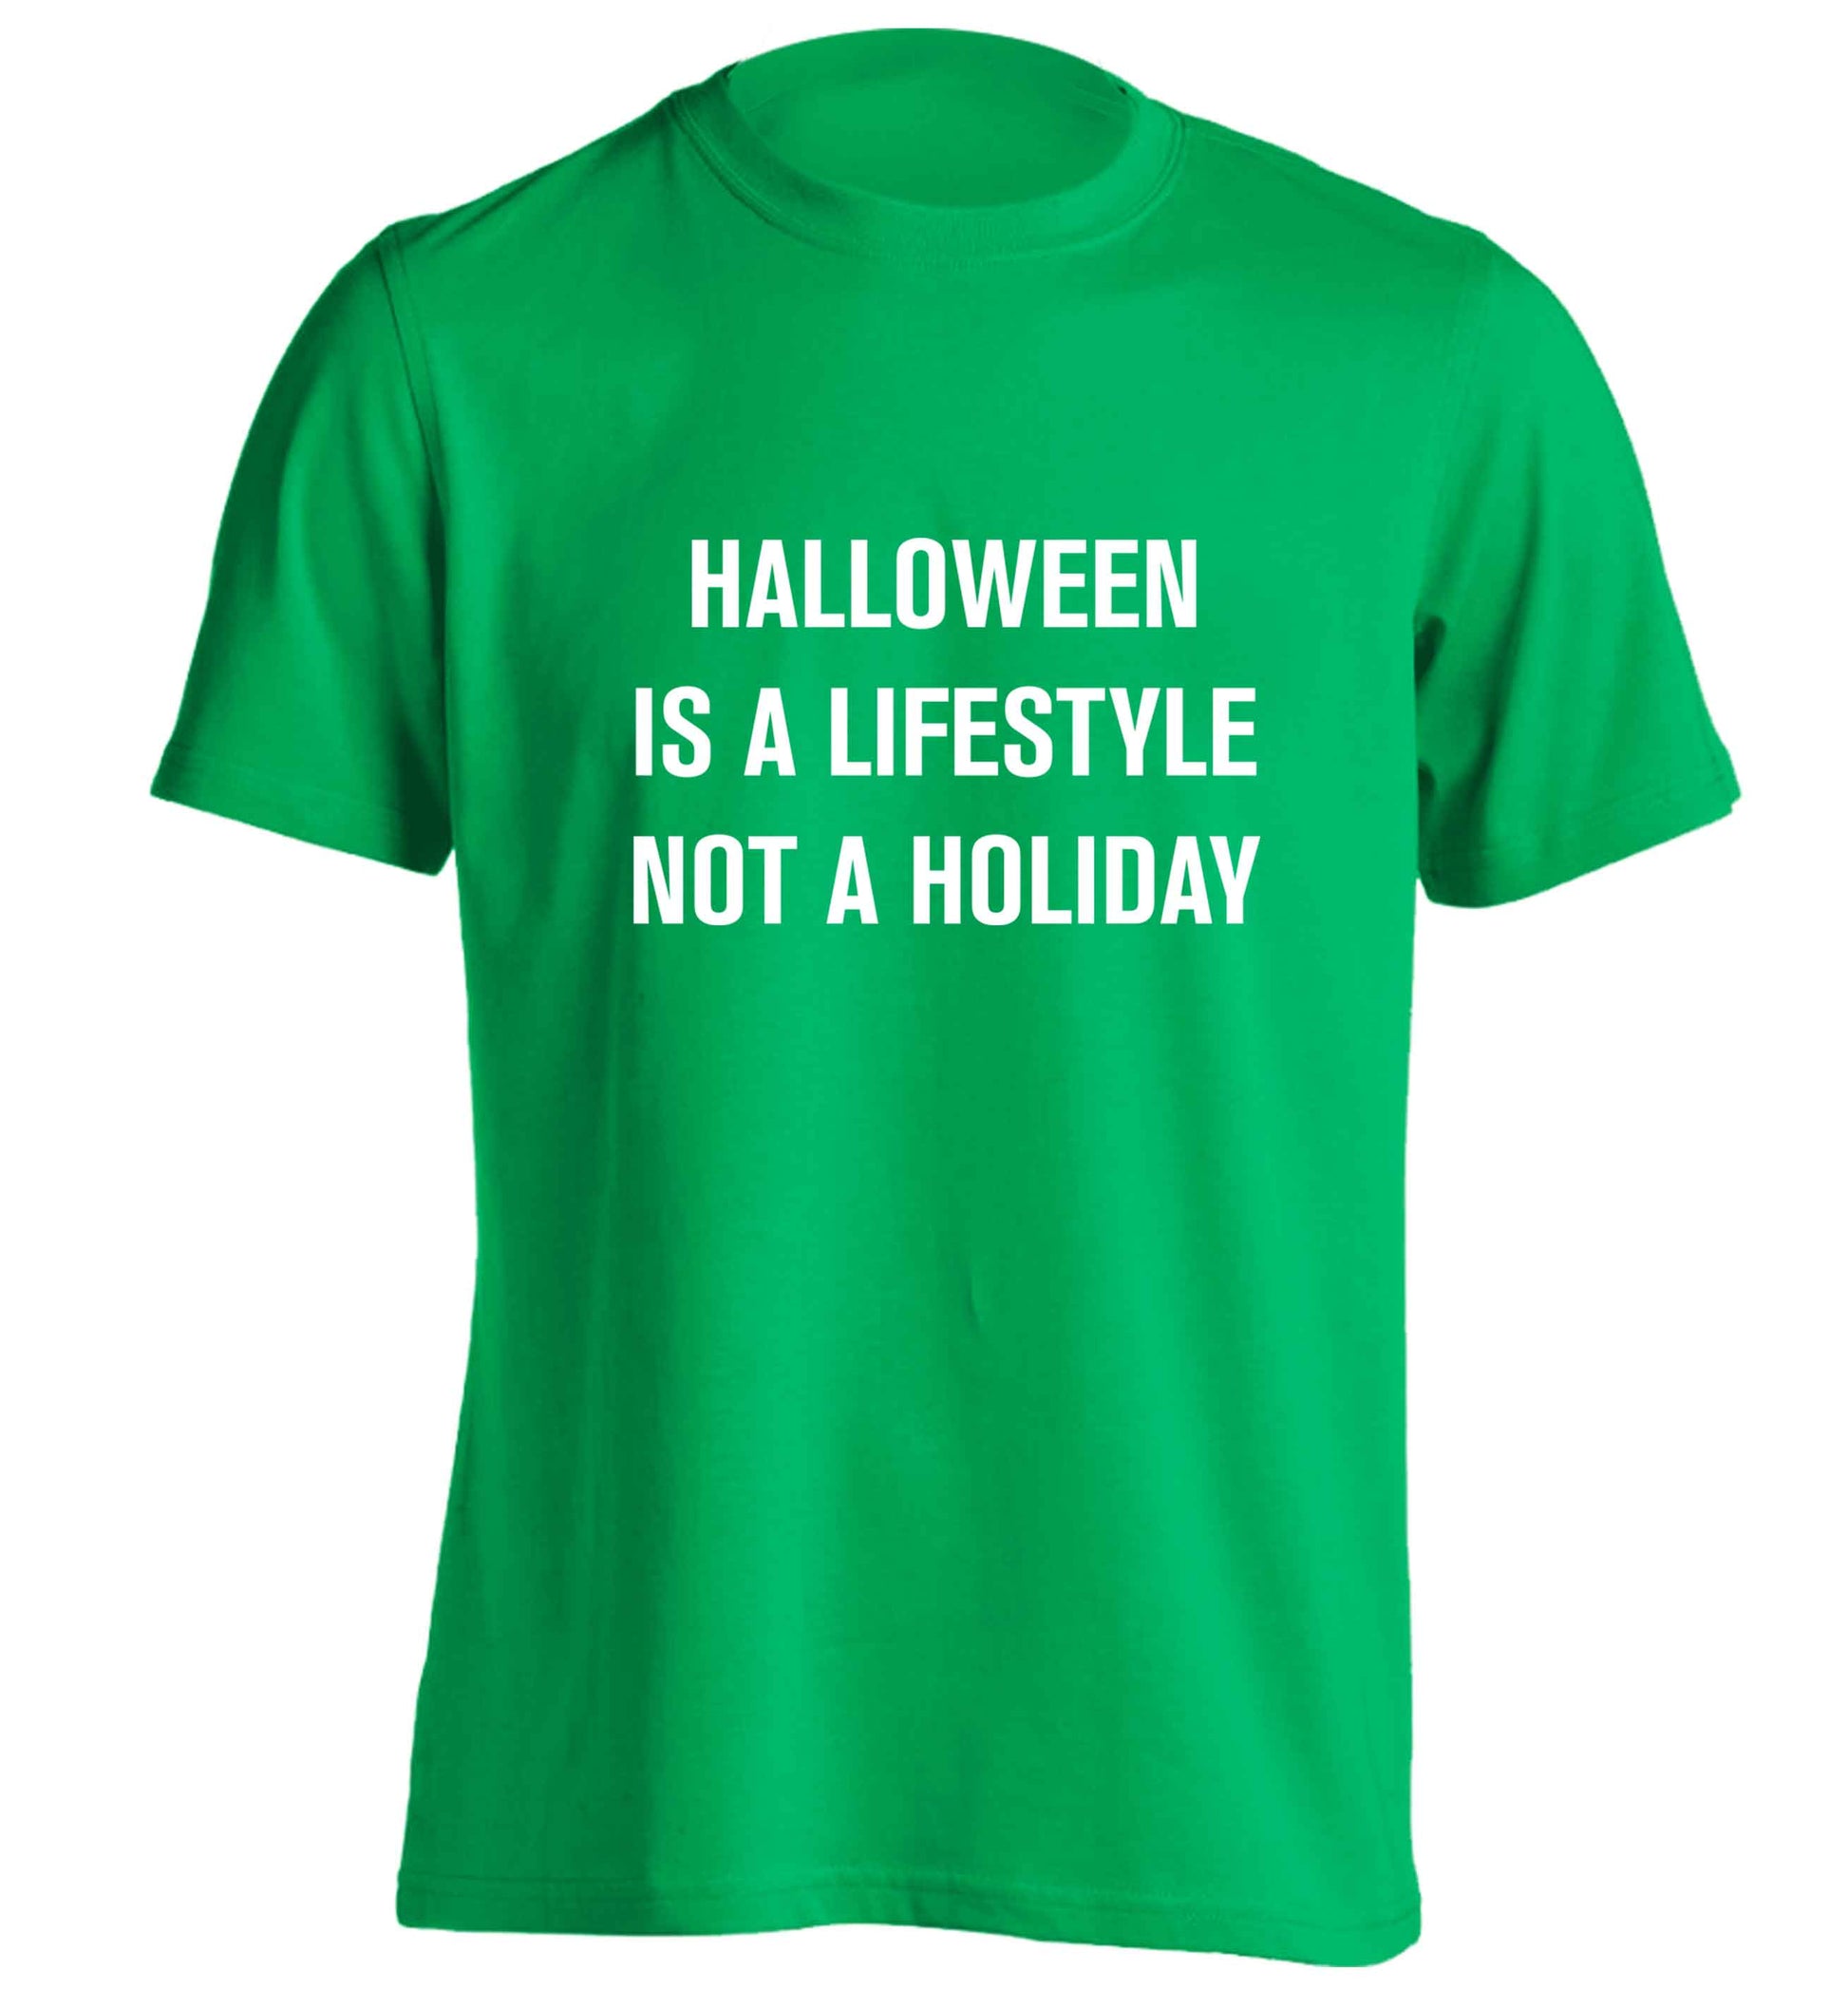 Halloween is a lifestyle not a holiday adults unisex green Tshirt 2XL